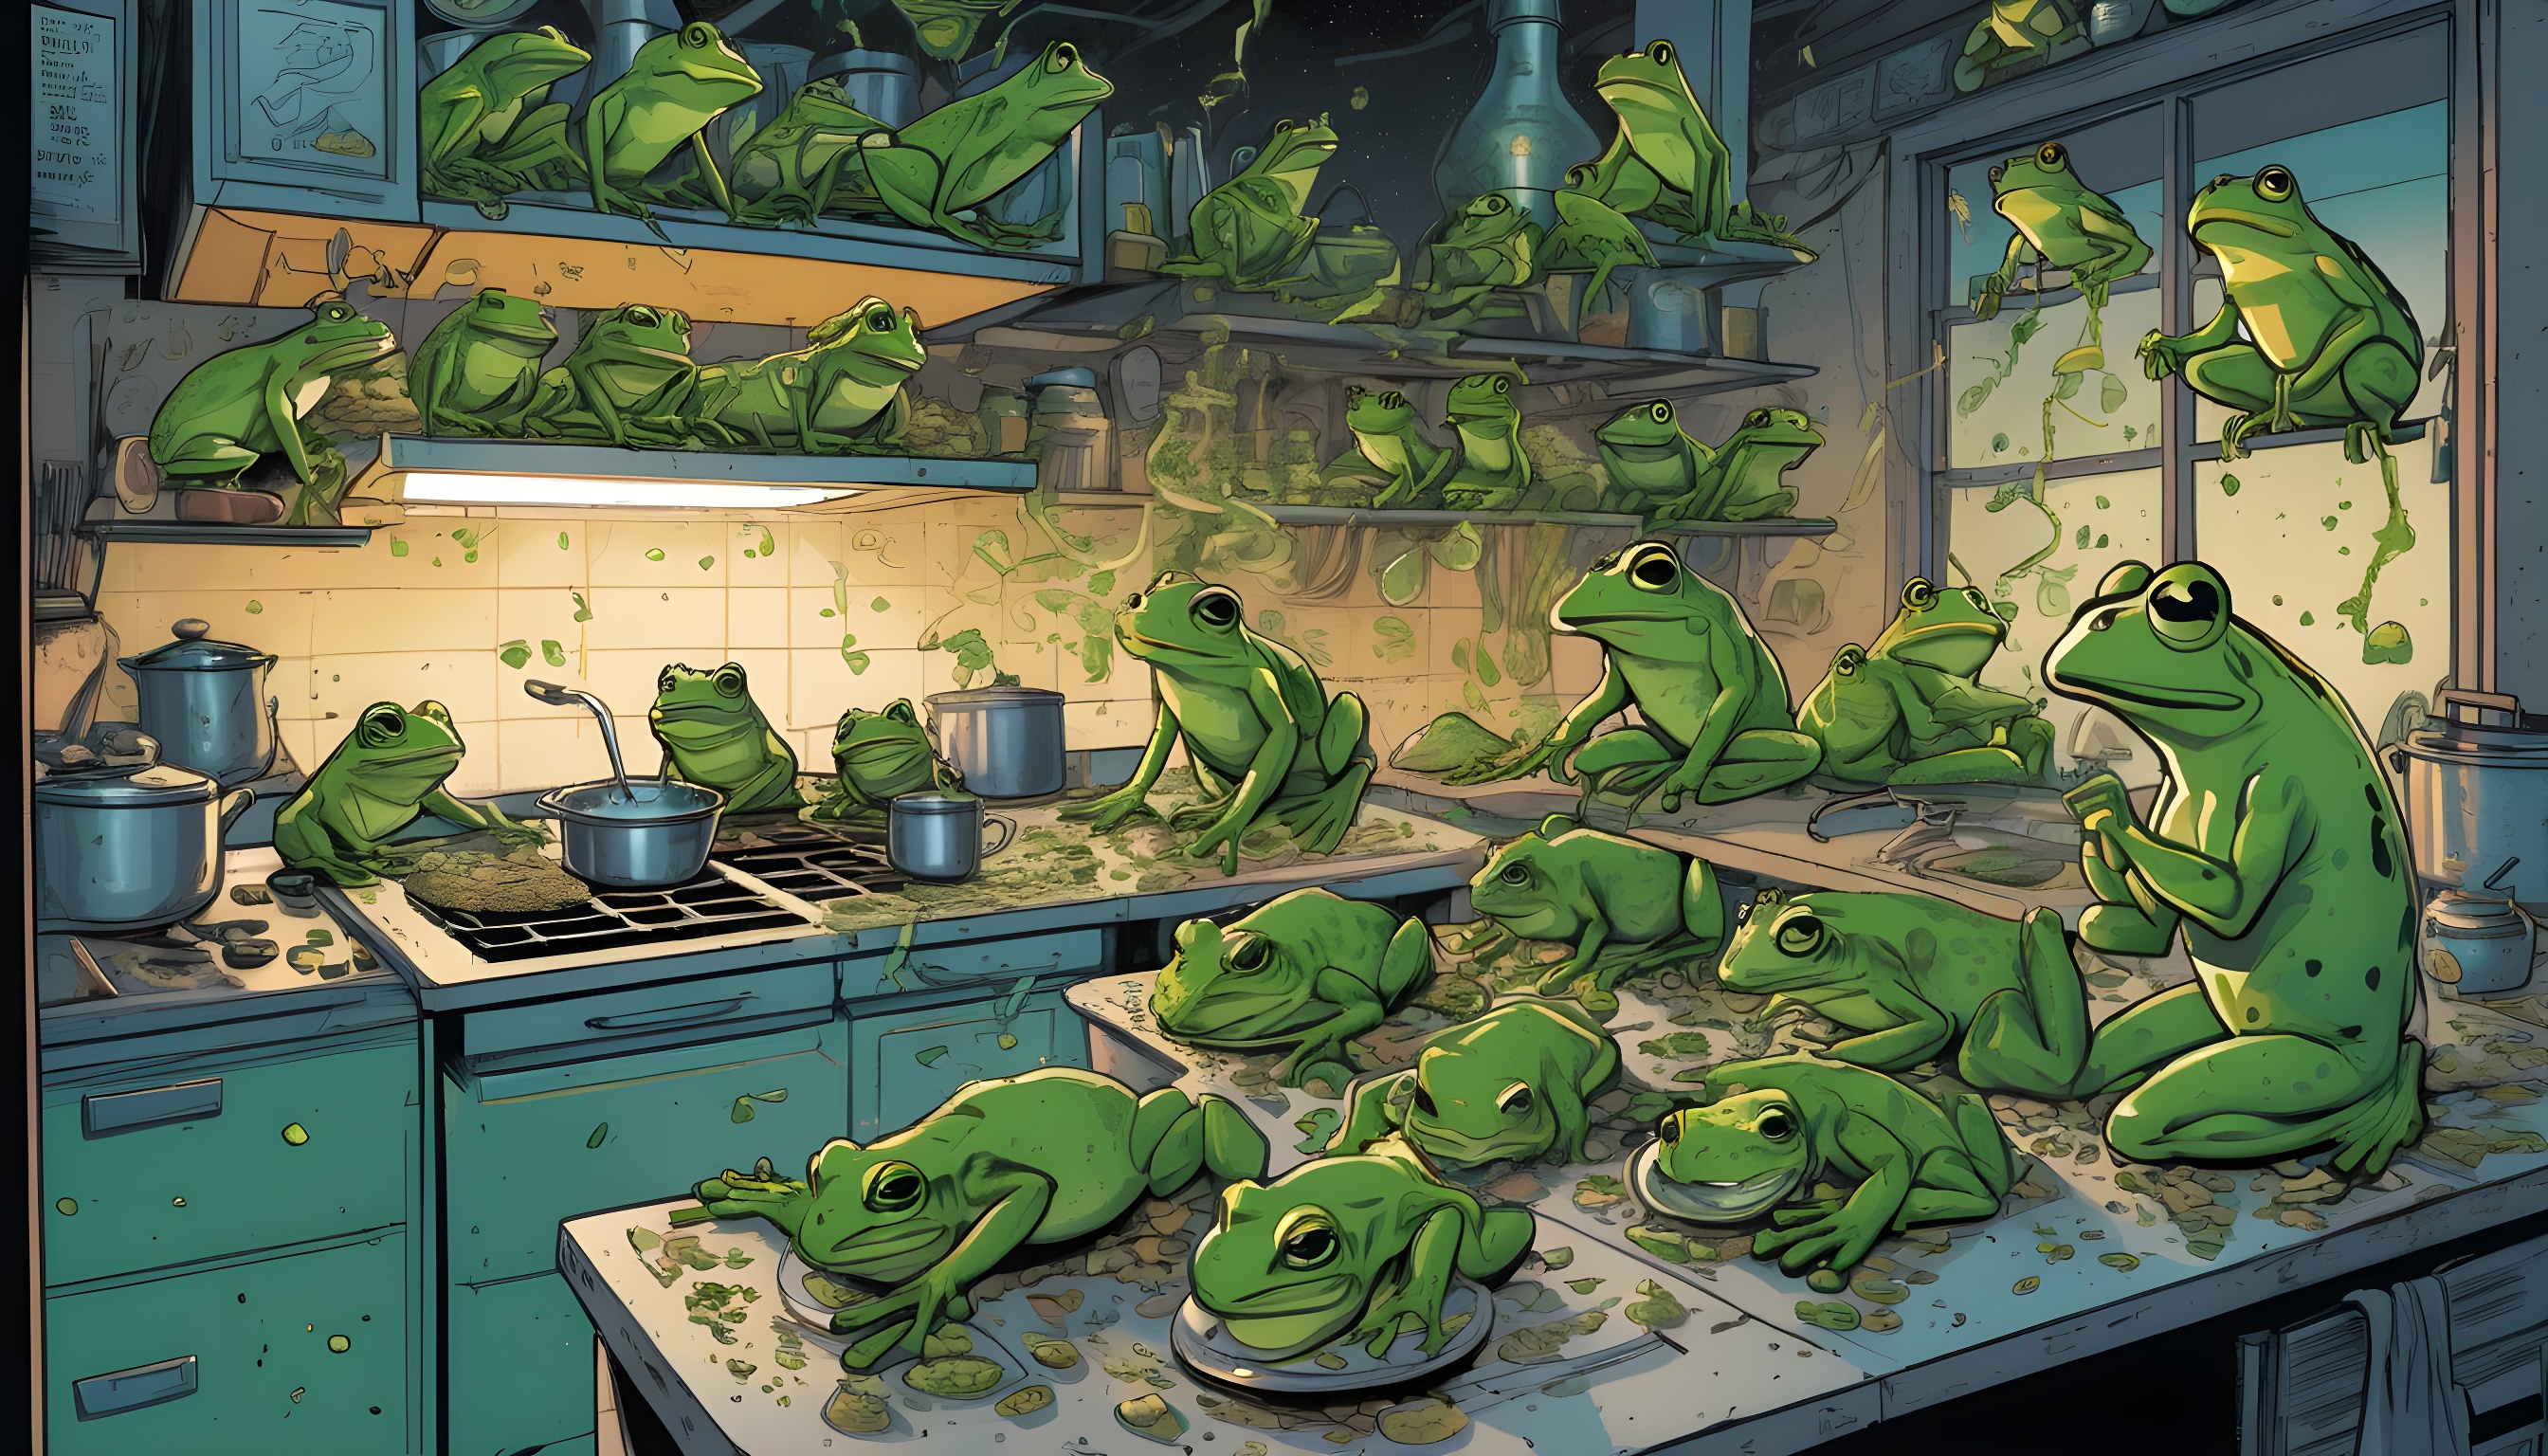 An-Egyptian-kitchen-trying-to-function-amidst-a-lively-scene-of-hundreds-of-green-frogs--each-...jpg